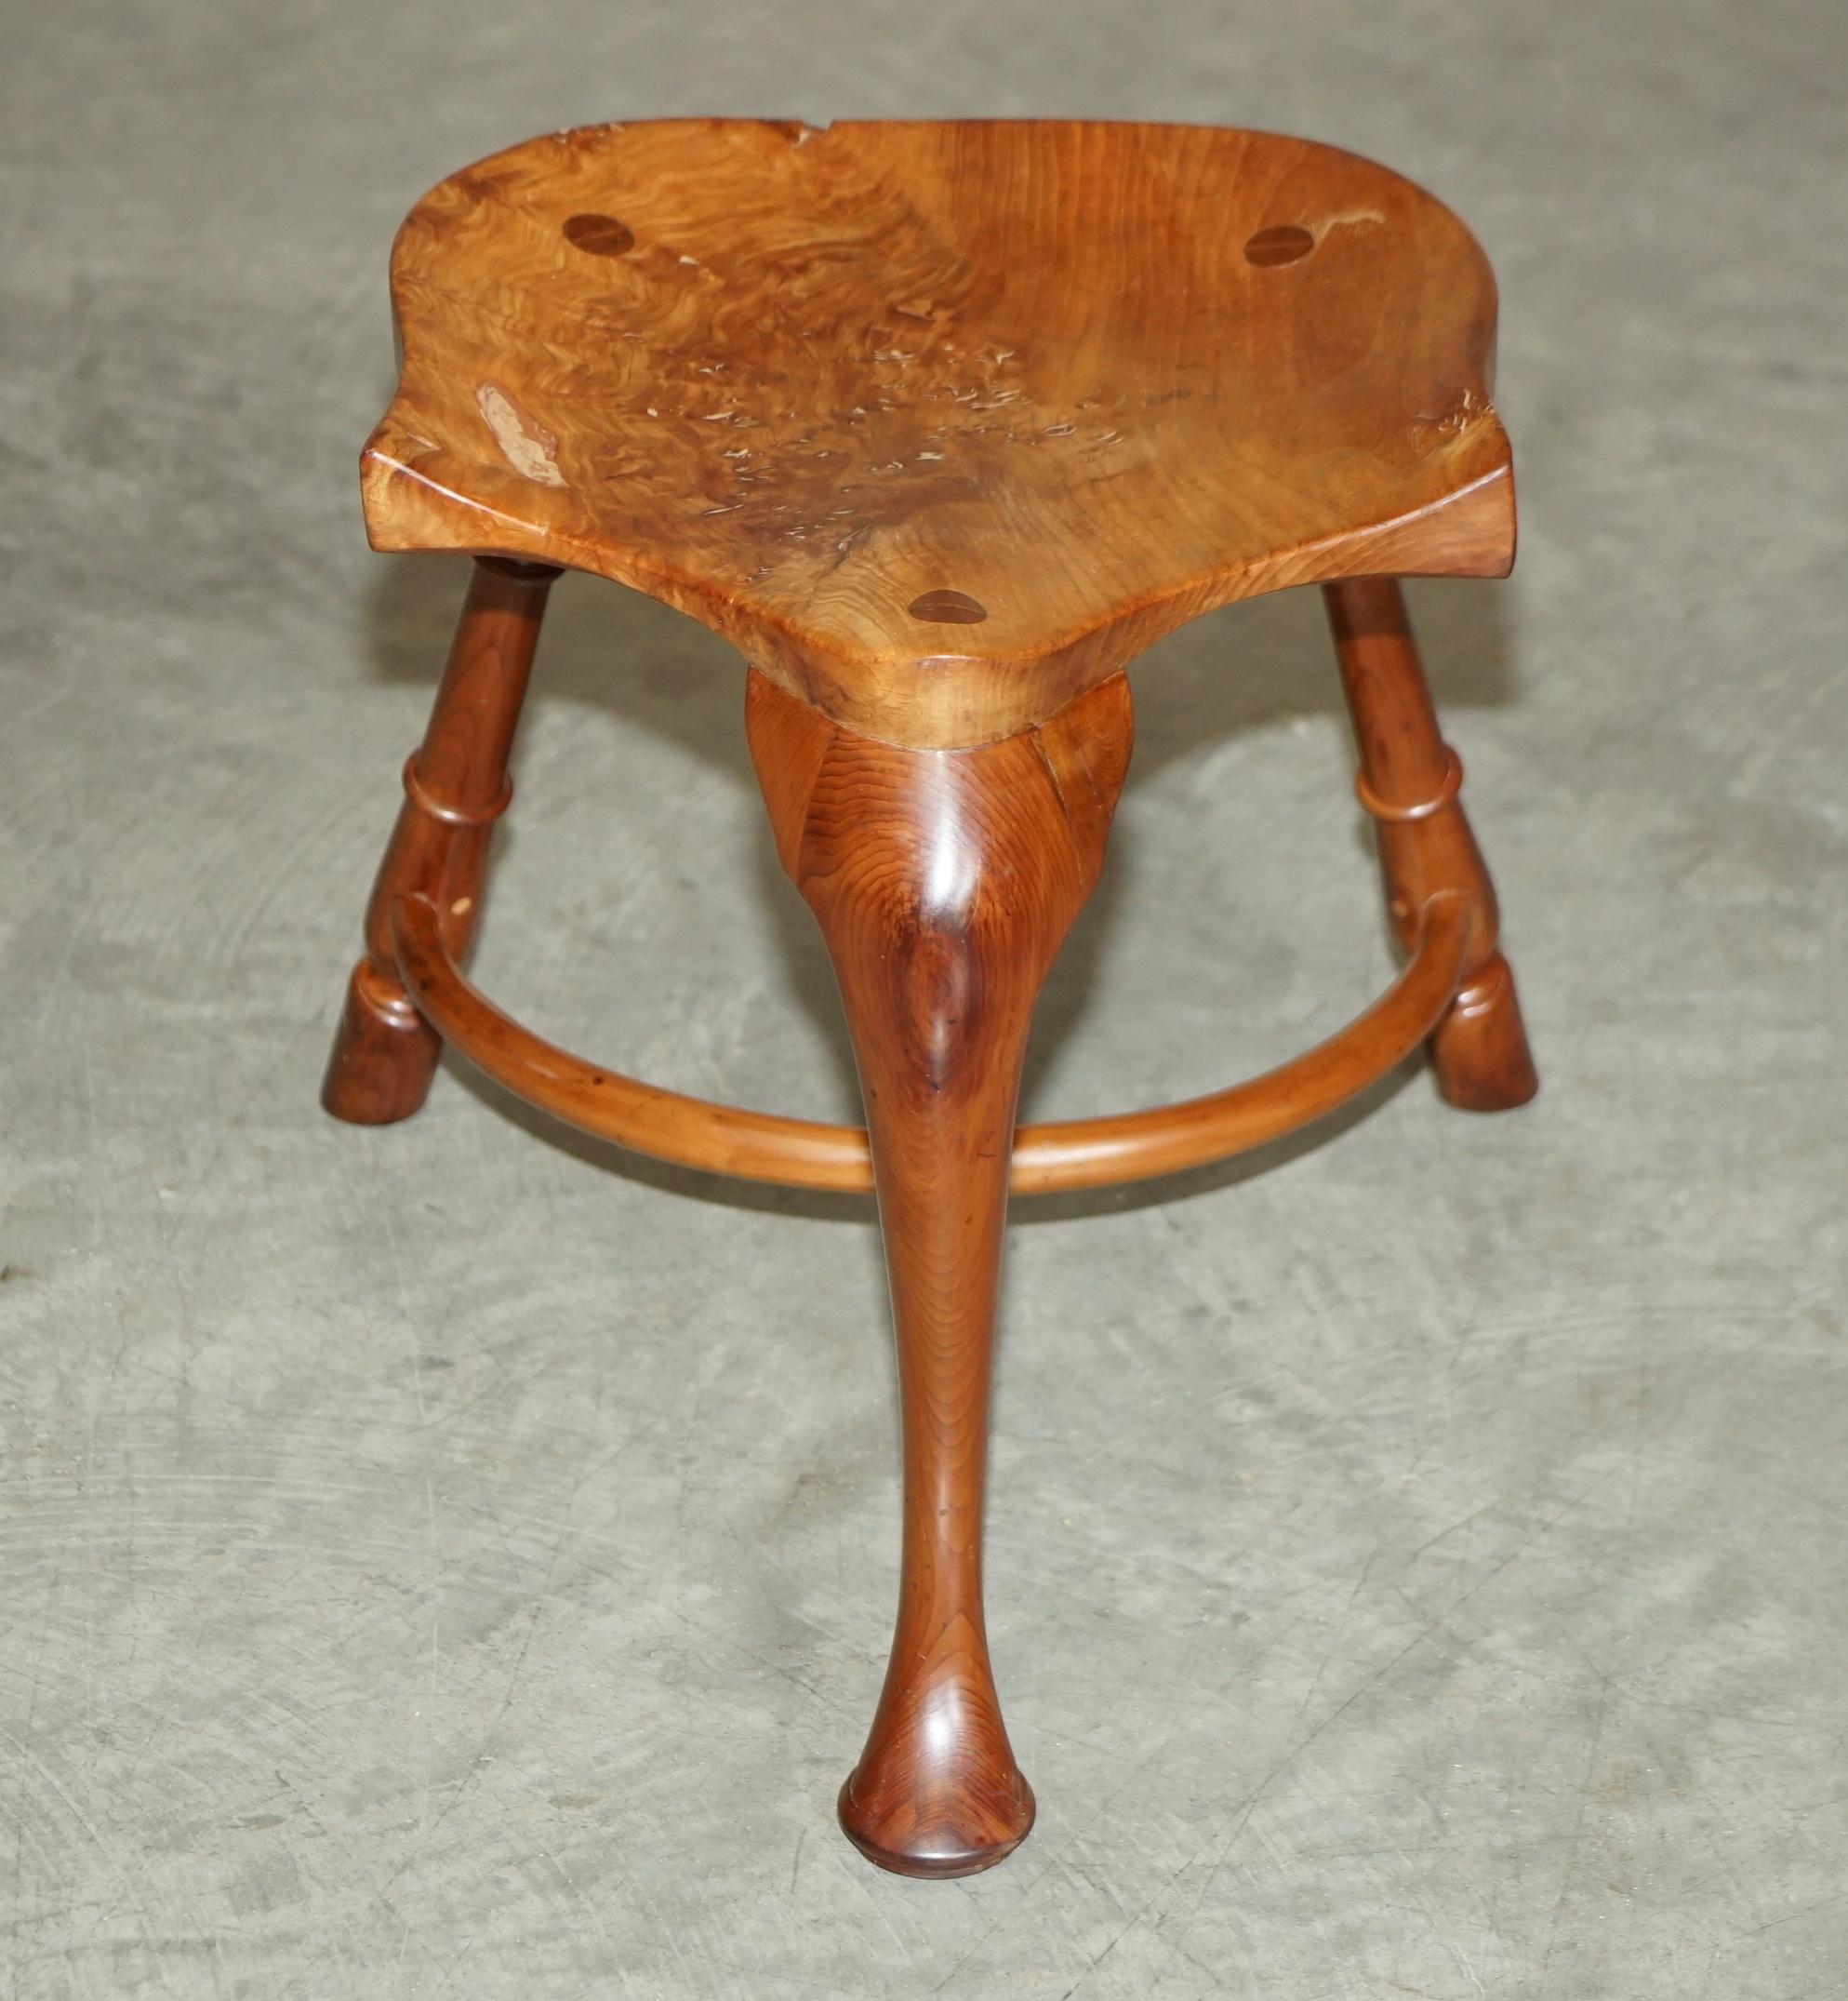 We are delighted to offer for sale this stunning burr yew wood vintage three legged stool with exquisite patina top.

A wonderful timber grain, the top is made from a solid slab of burr yew which has been beautifully crafted and sculpted into a